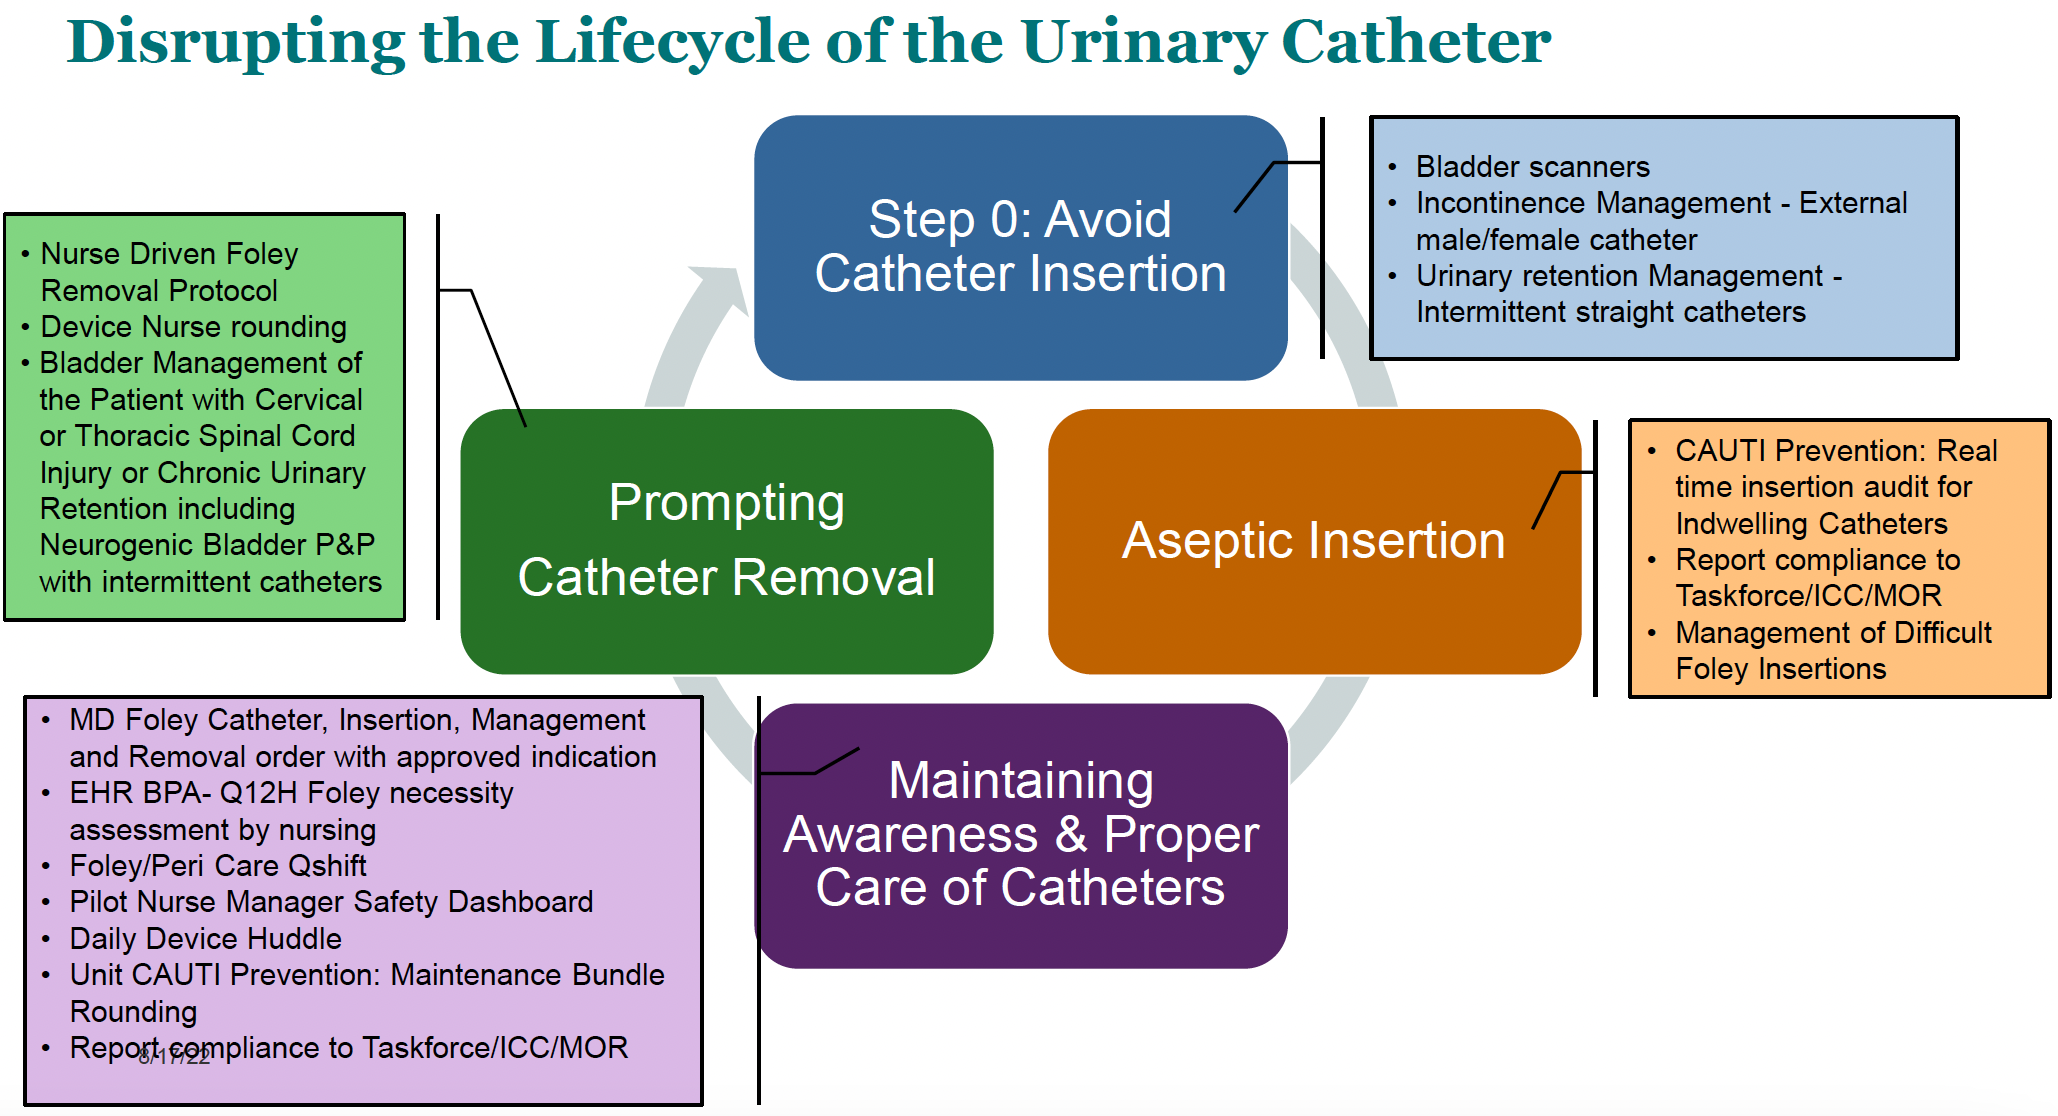 Screen shot of the Disrupting the Lifecycle of the Urinary Catheter infographic